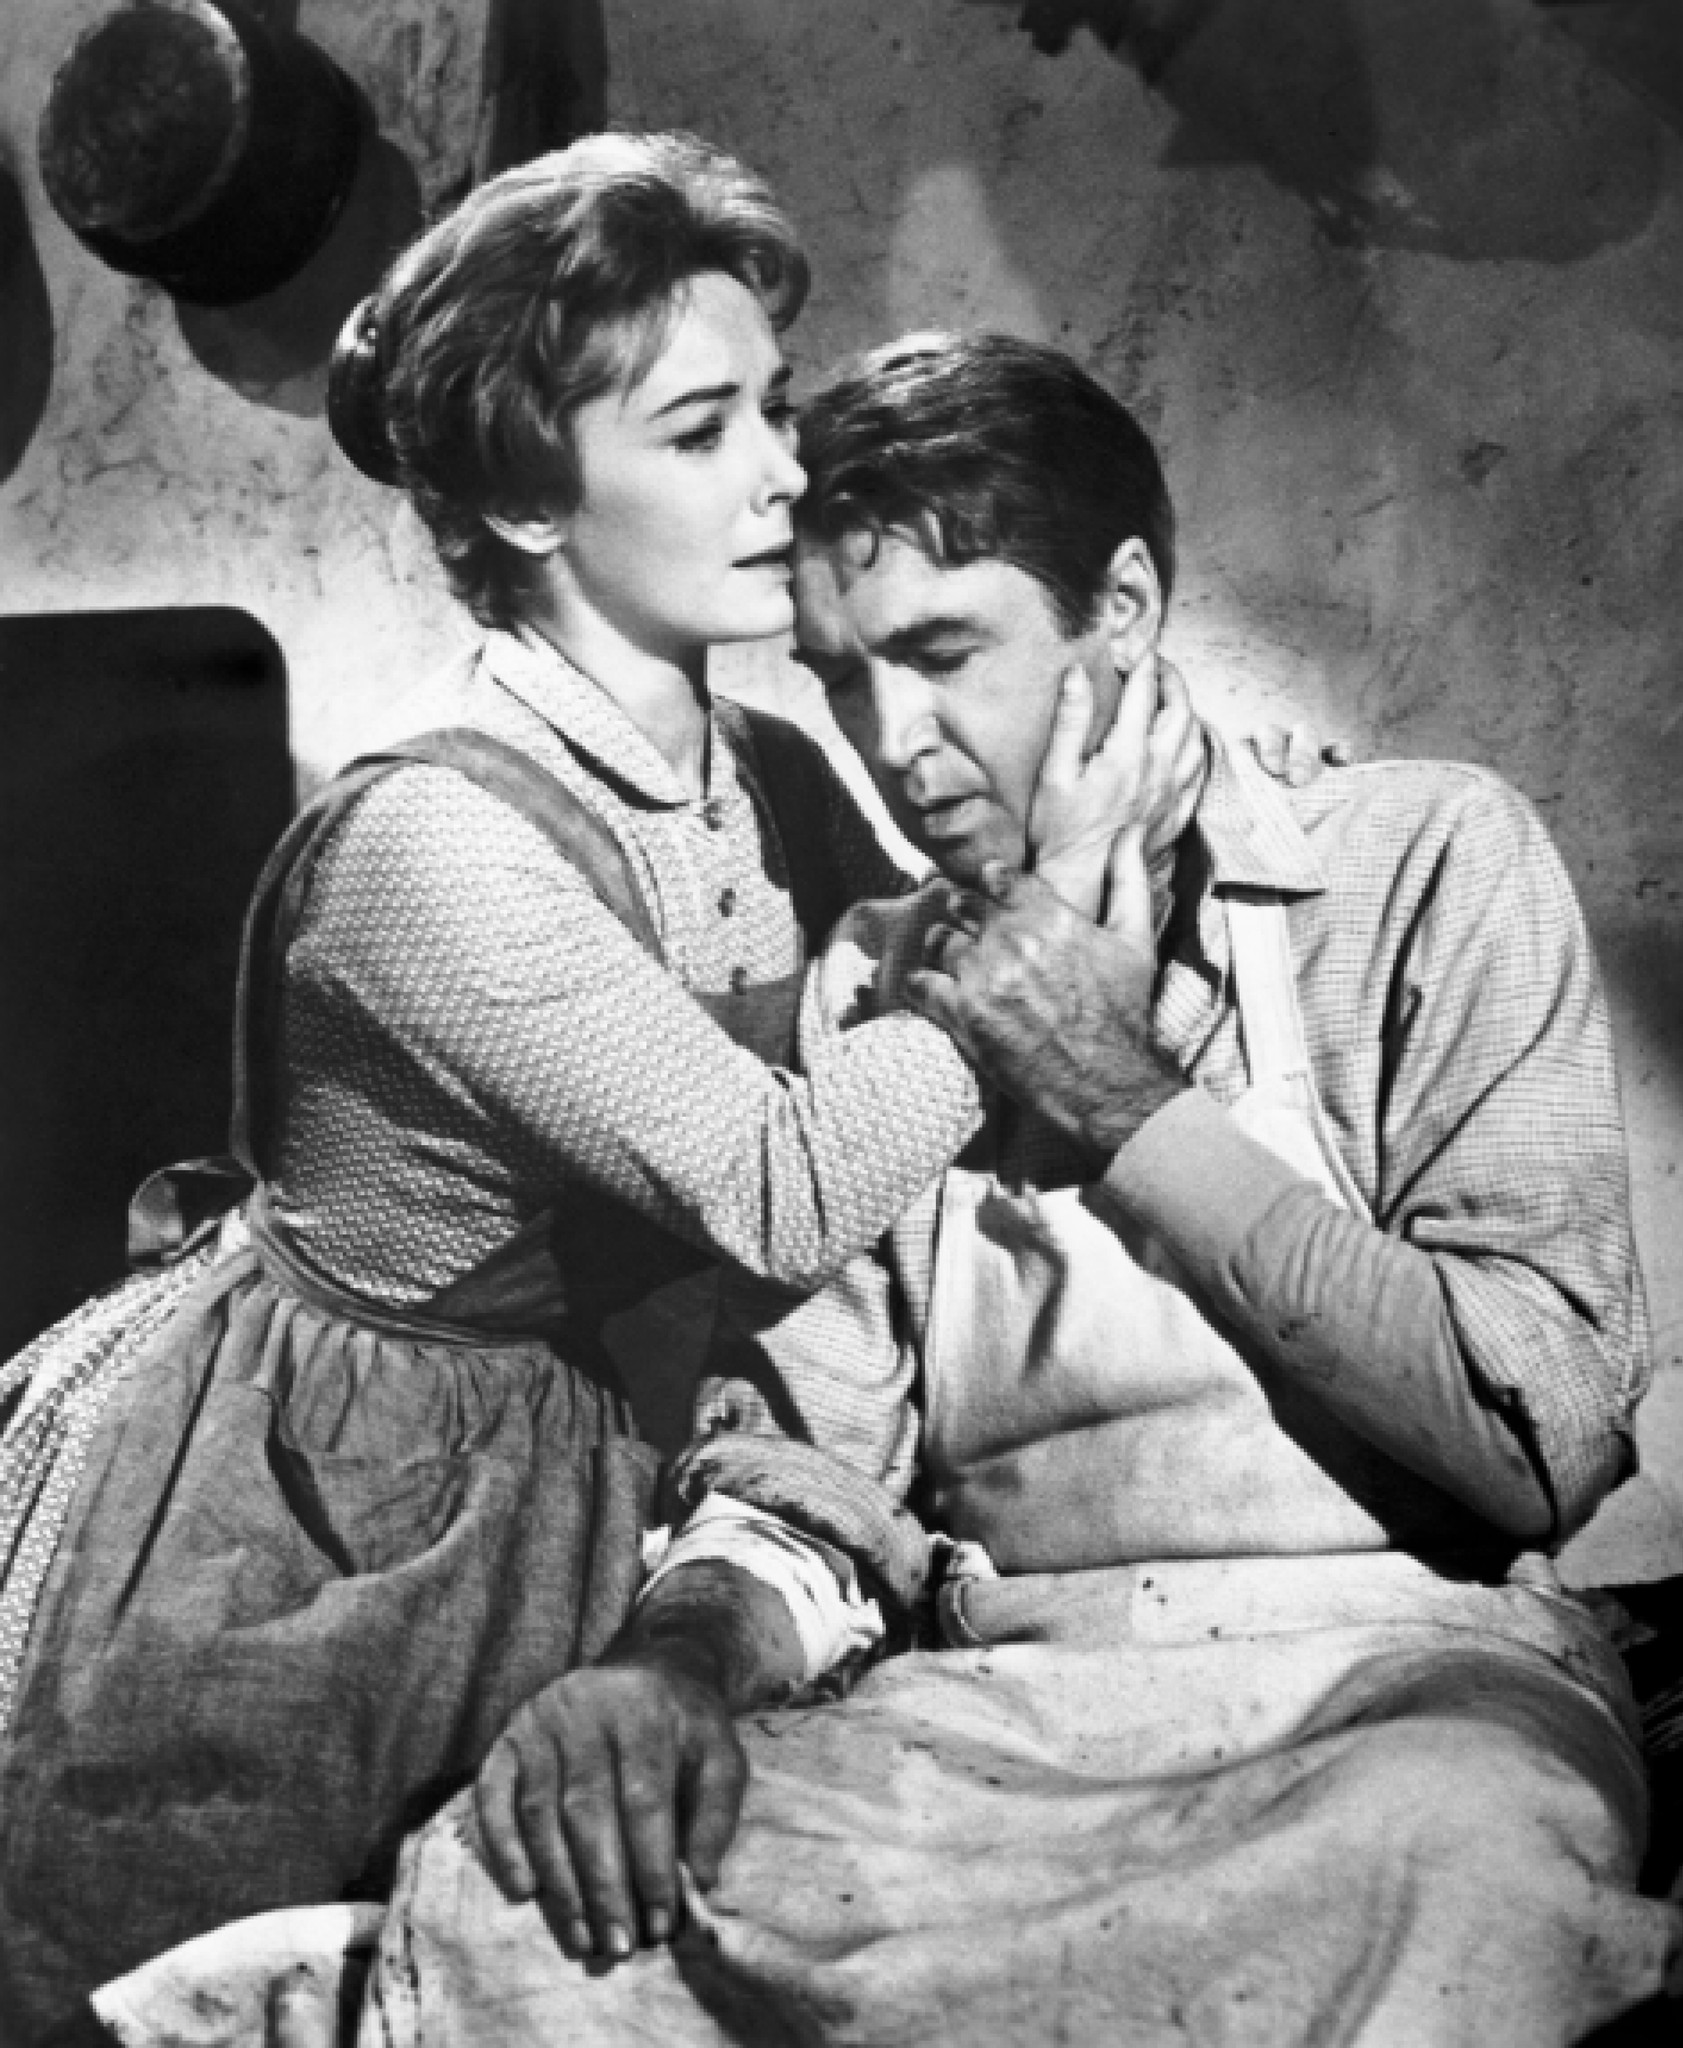 Still of James Stewart and Vera Miles in The Man Who Shot Liberty Valance (1962)